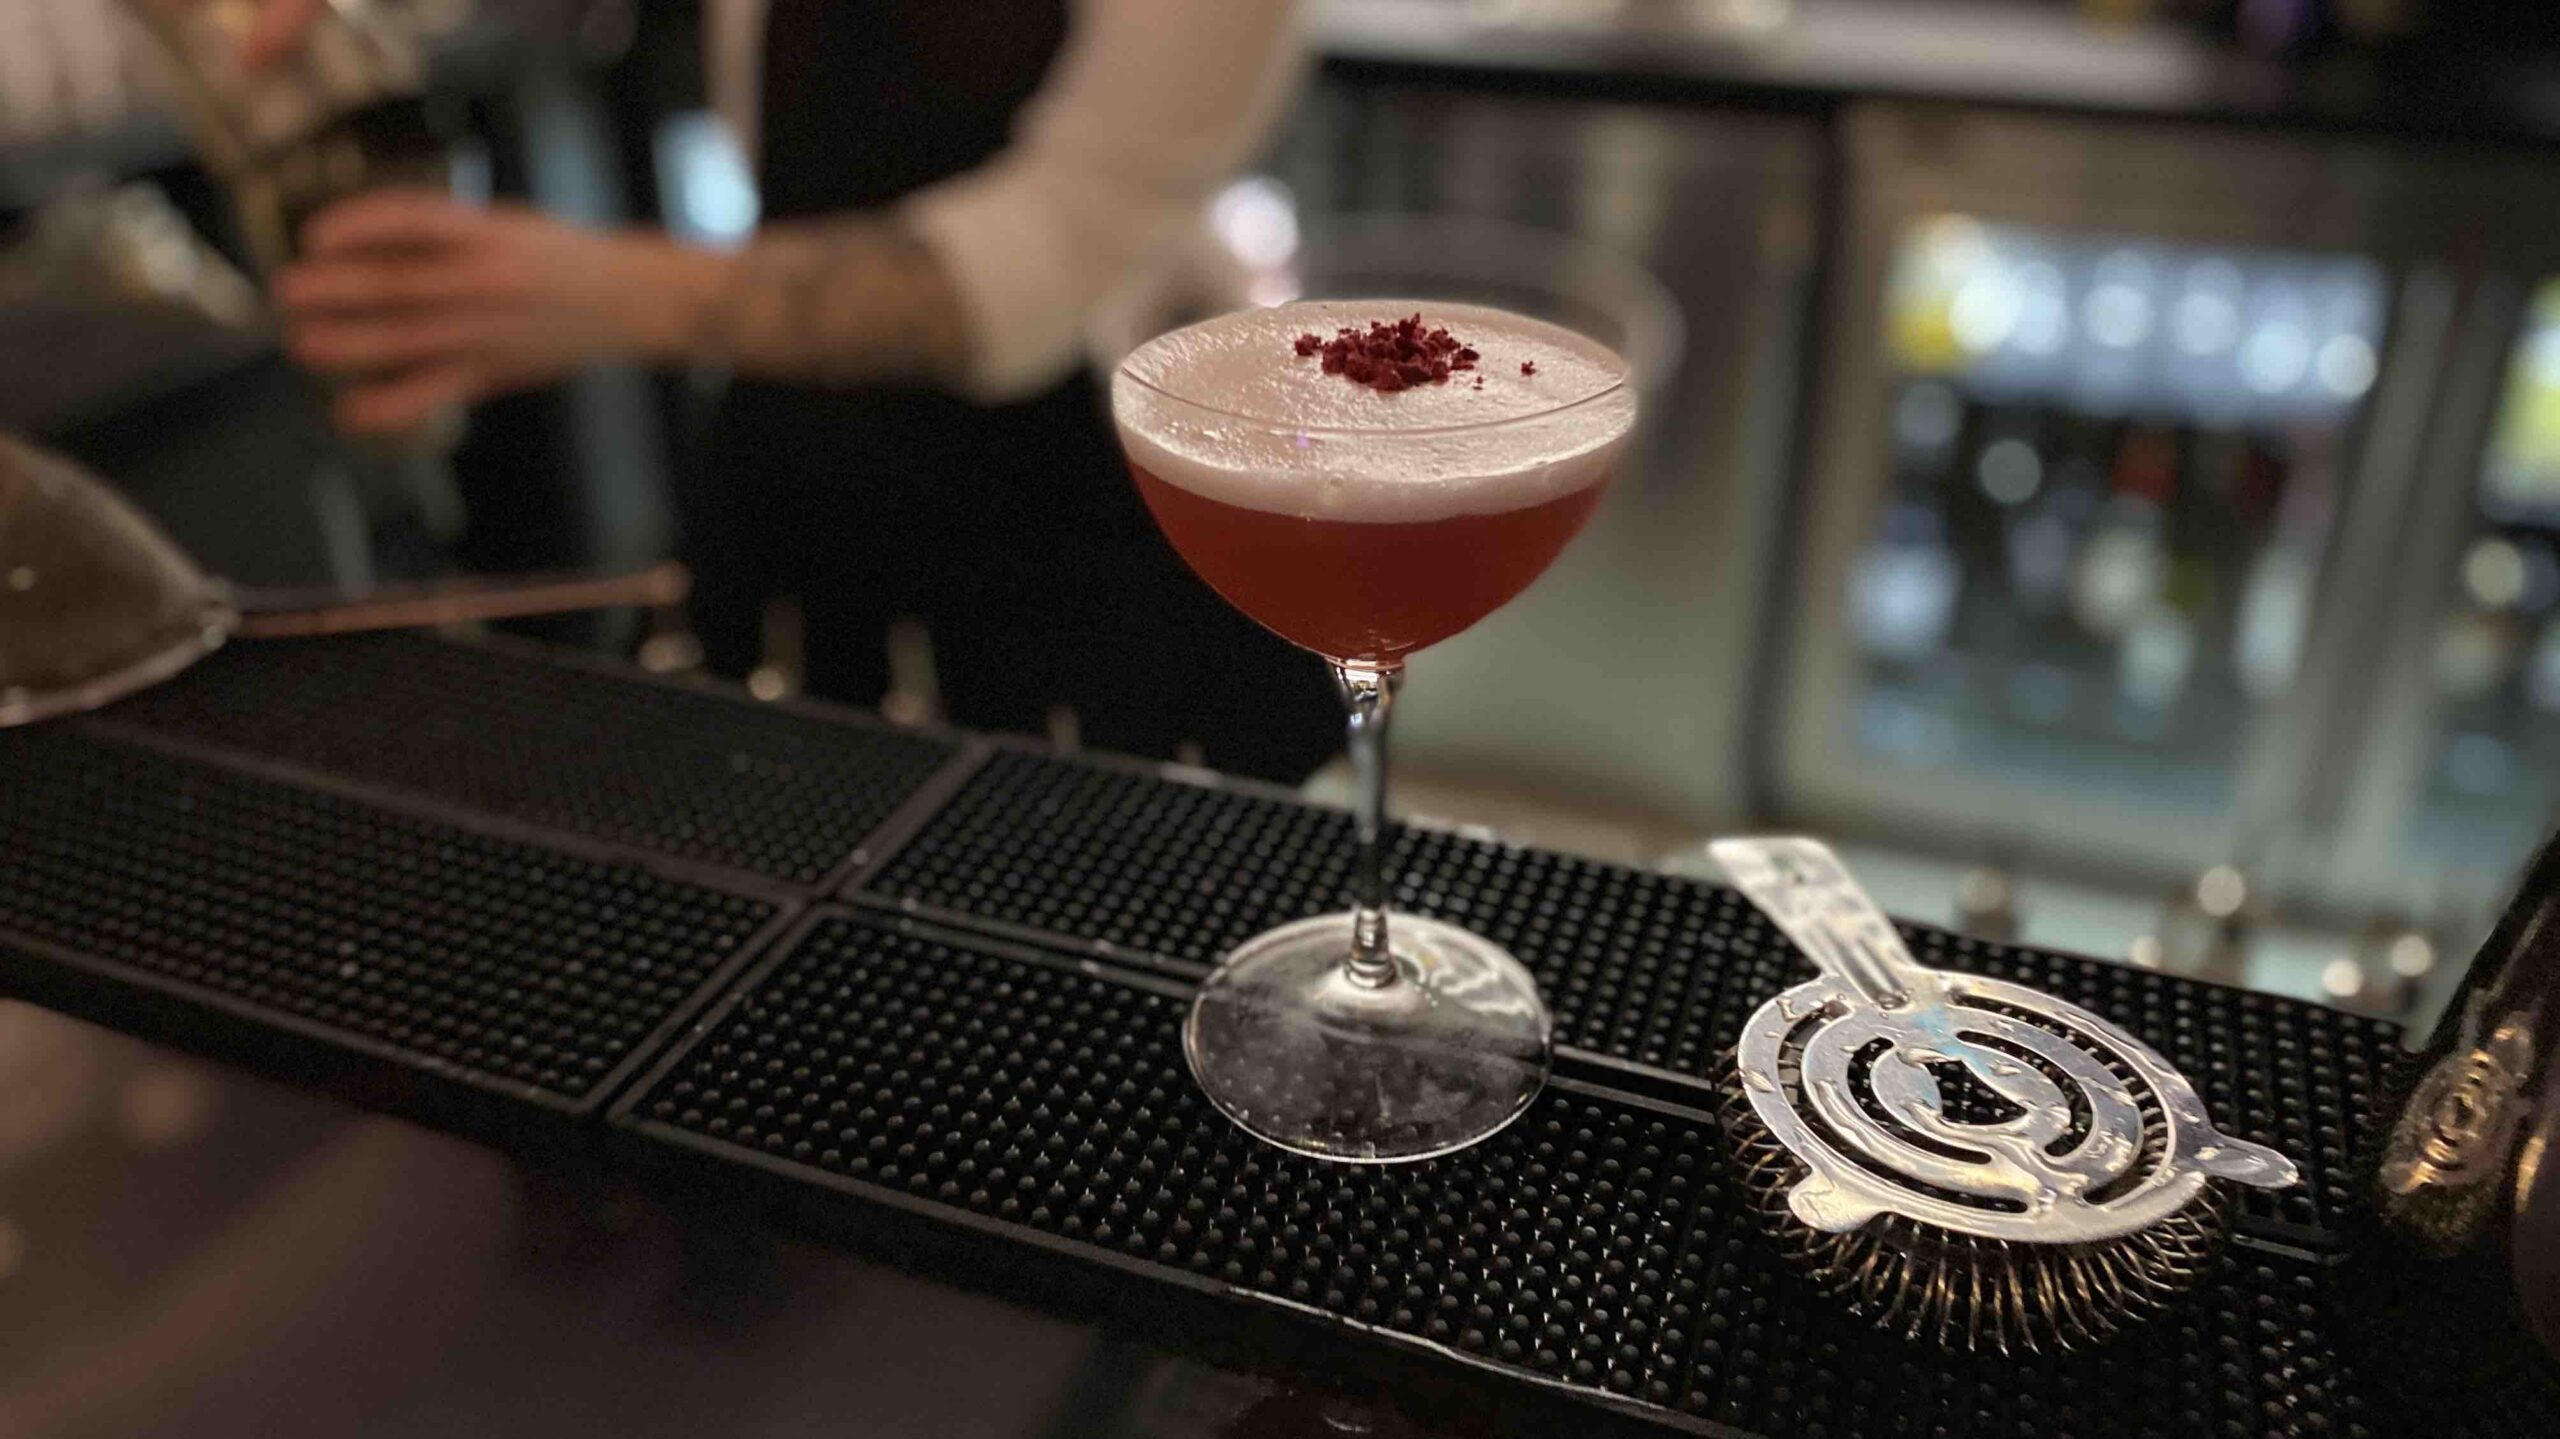 The Bank Gastrobar server shaking up a cocktail